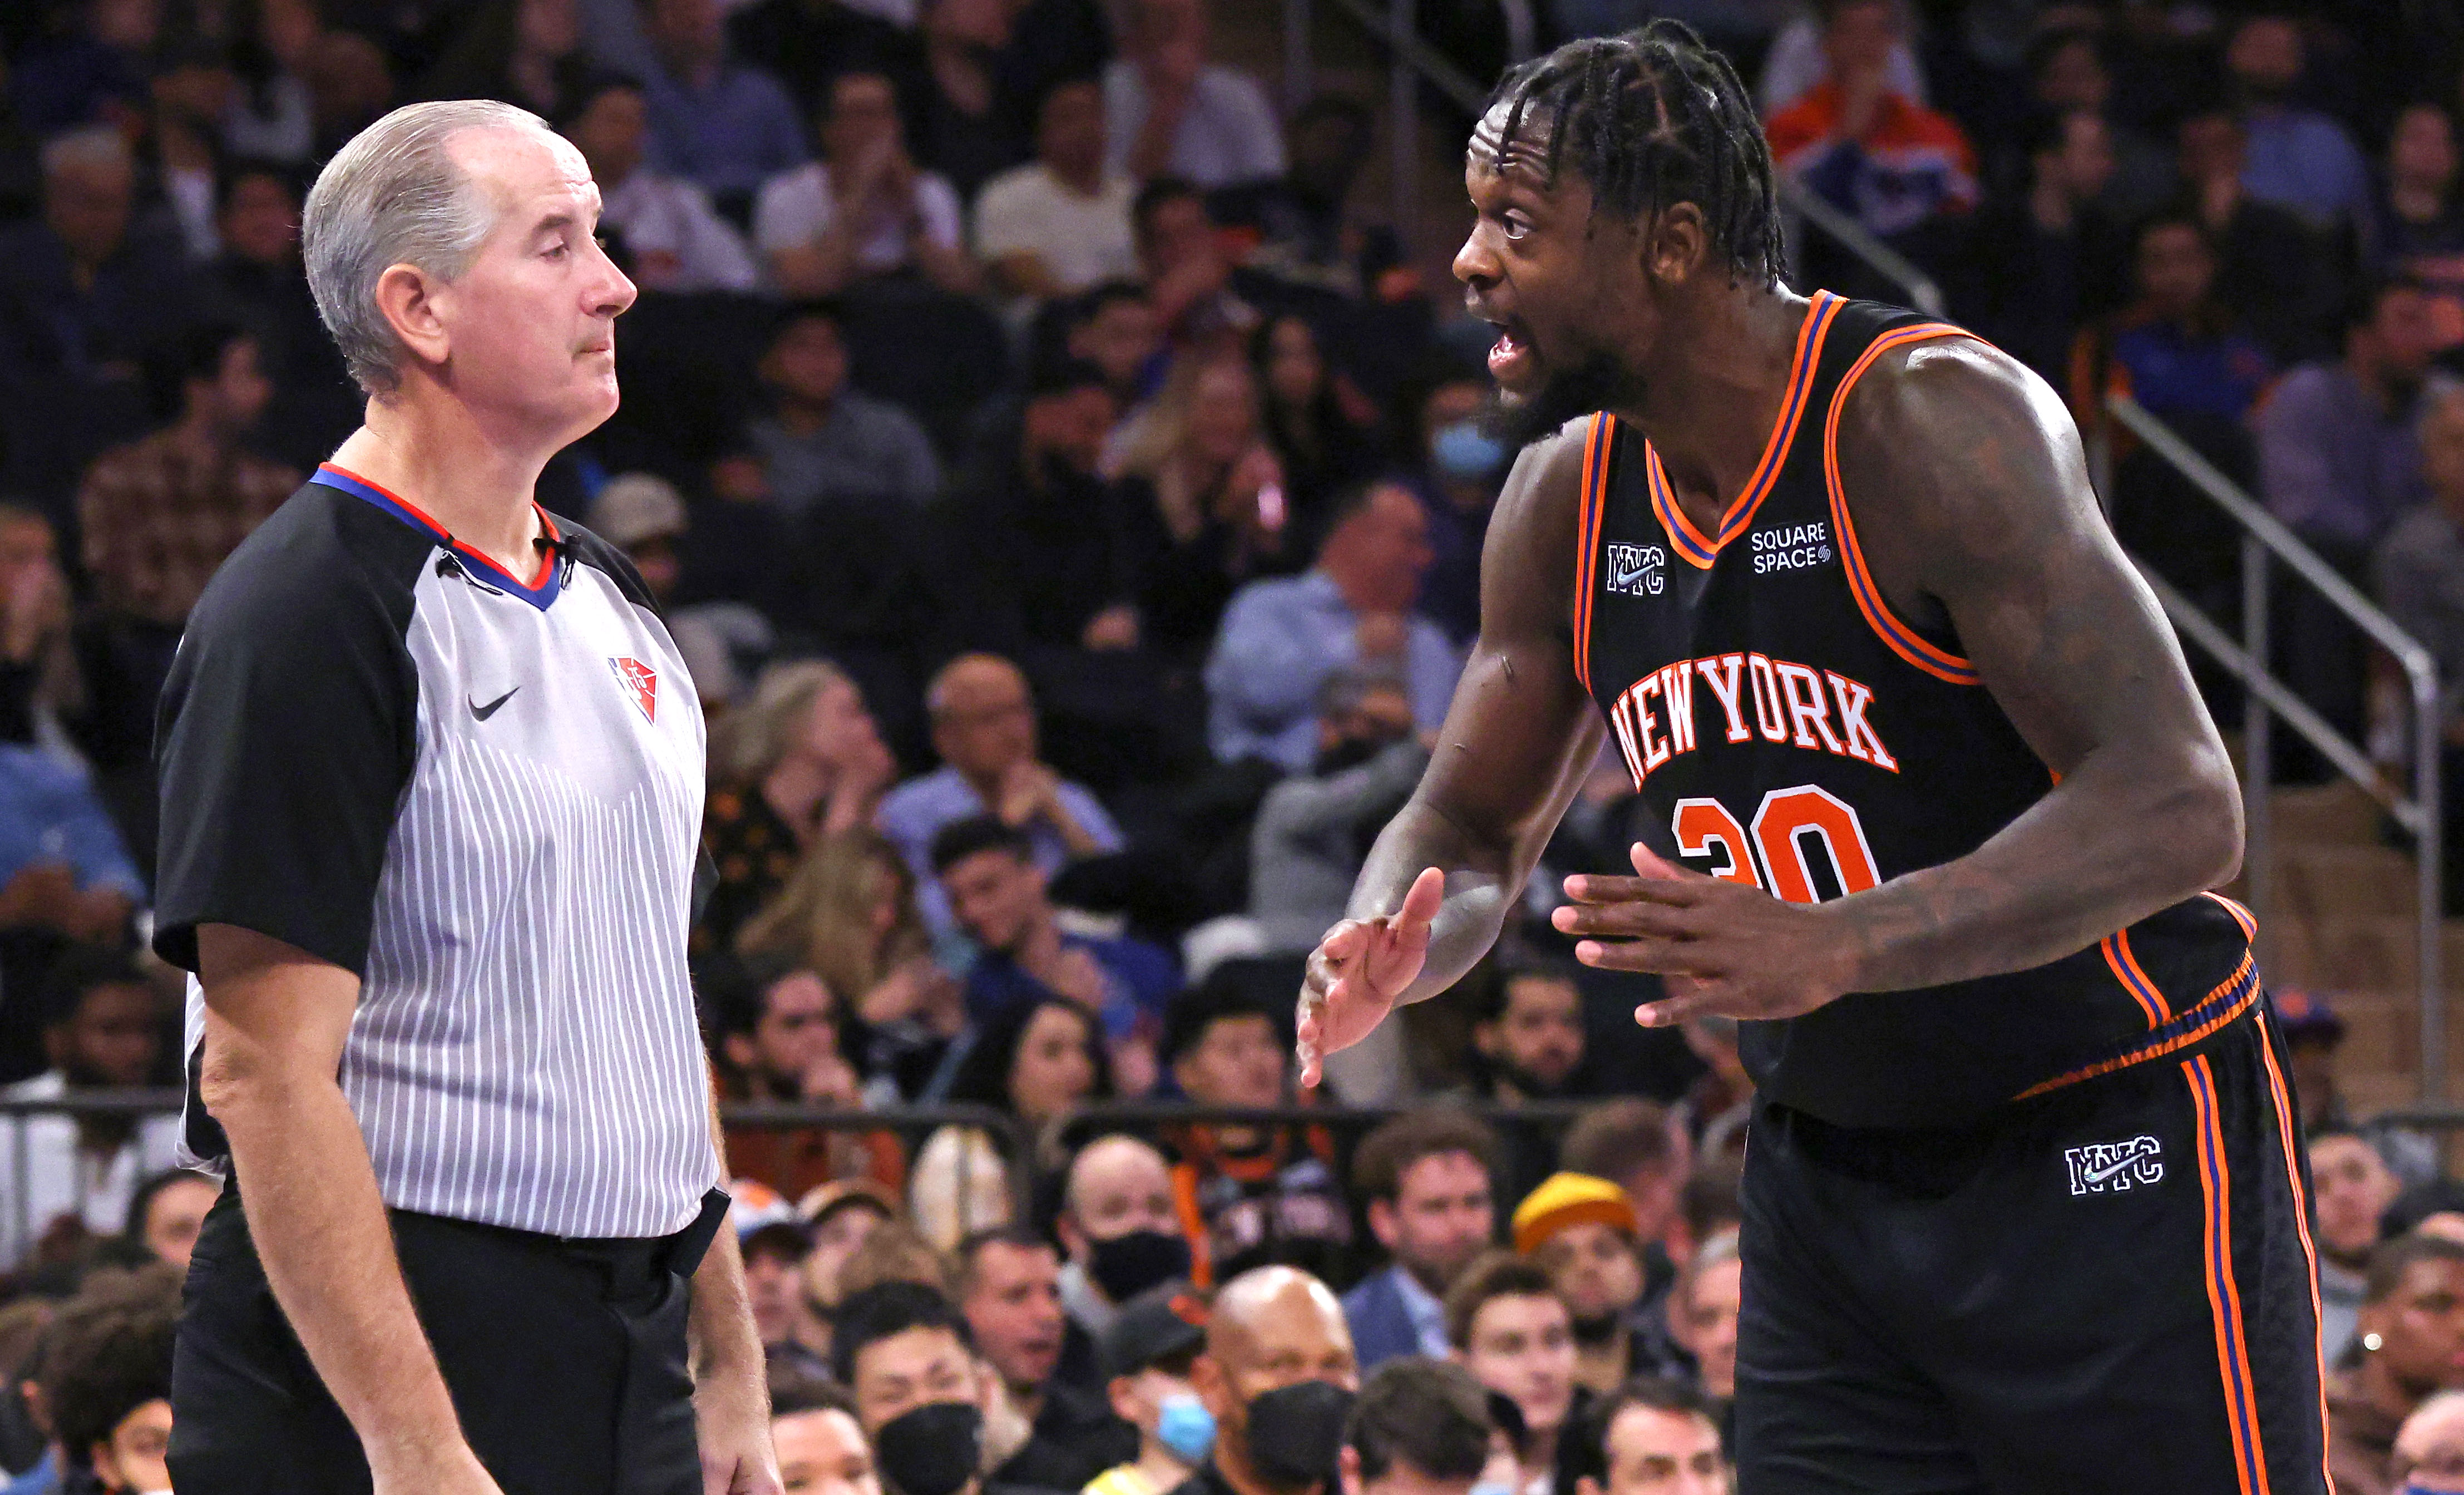 Julius Randle argues with a referee during the Knicks' 106-100 win over the Lakers.